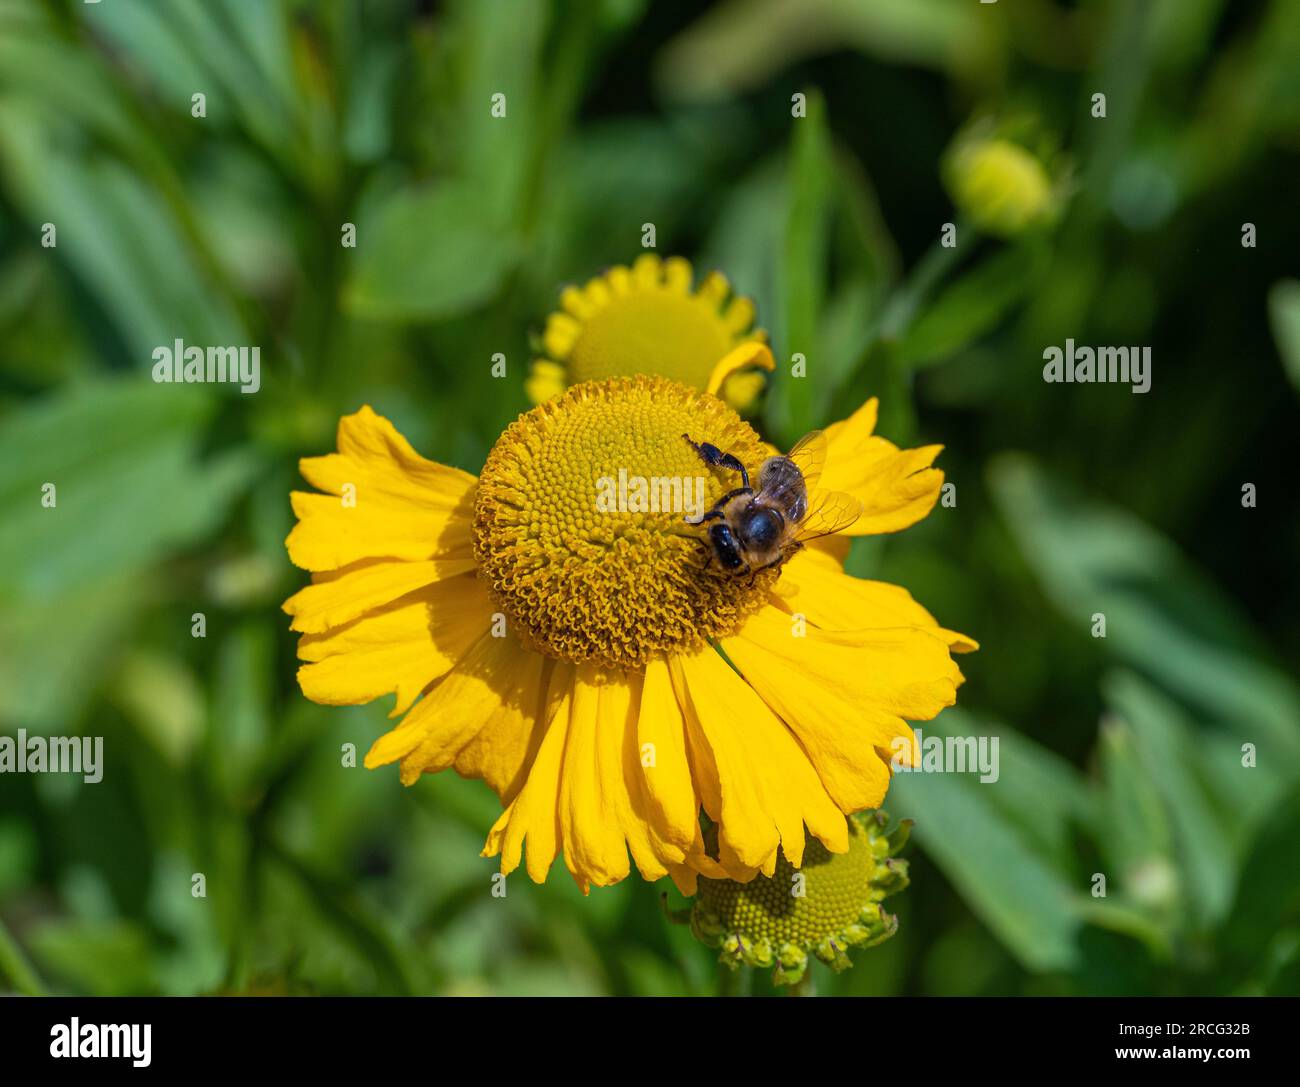 Close-up of a bee pollinating a yellow flower of Helenium Pumilum Magnificum (Sneezeweed). Stock Photo